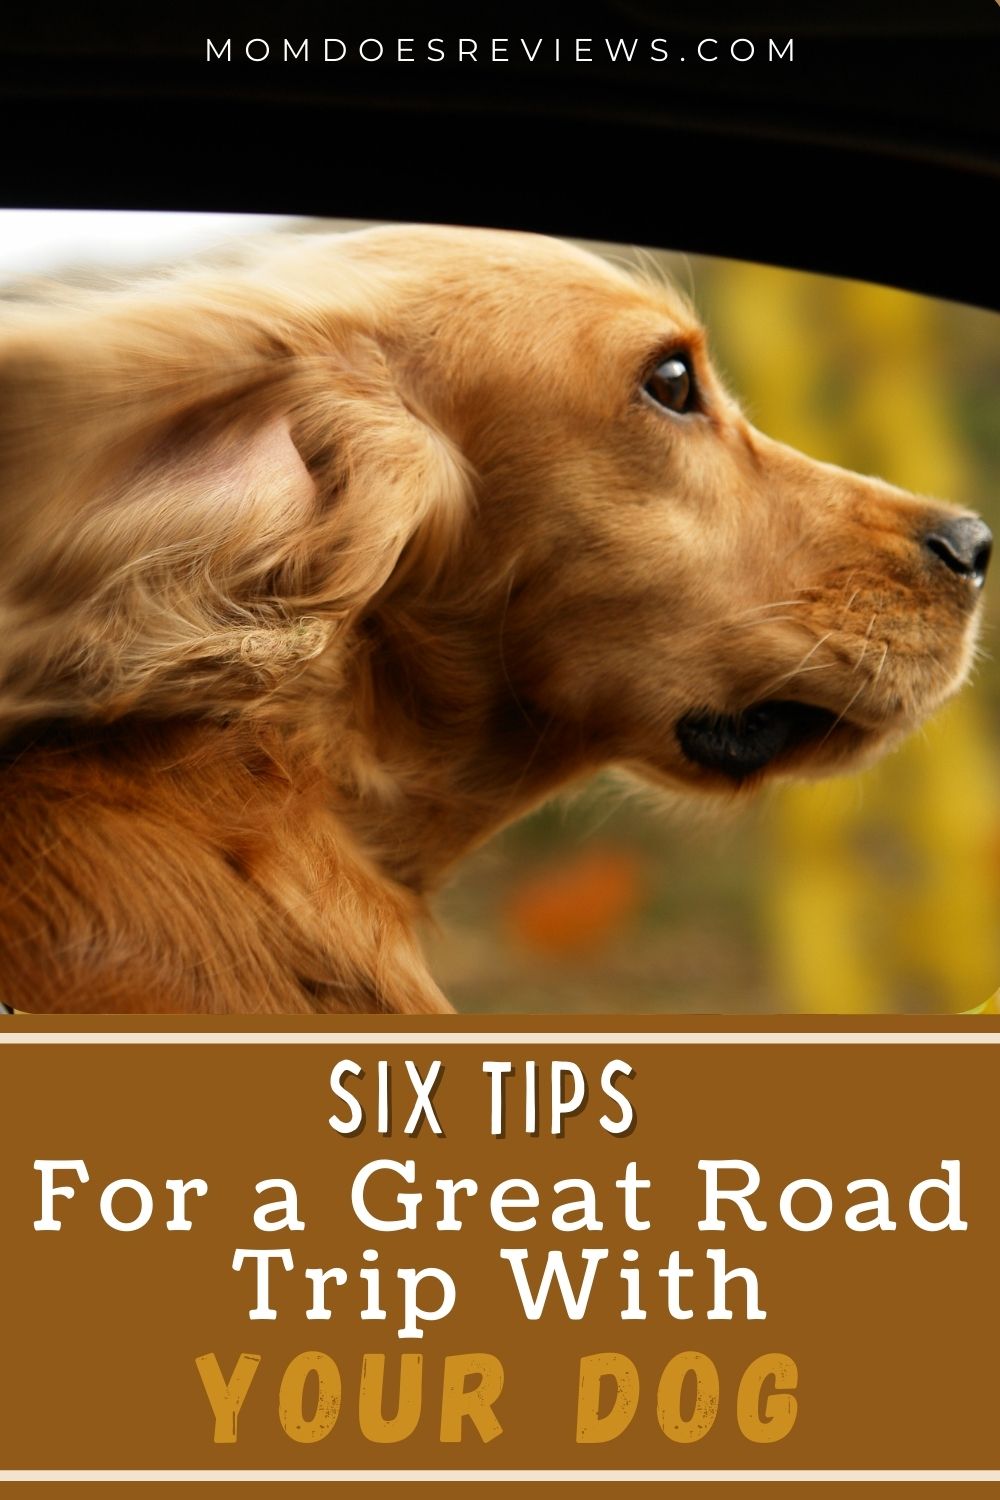 6 Tips for a Great Road Trip with Your Dog